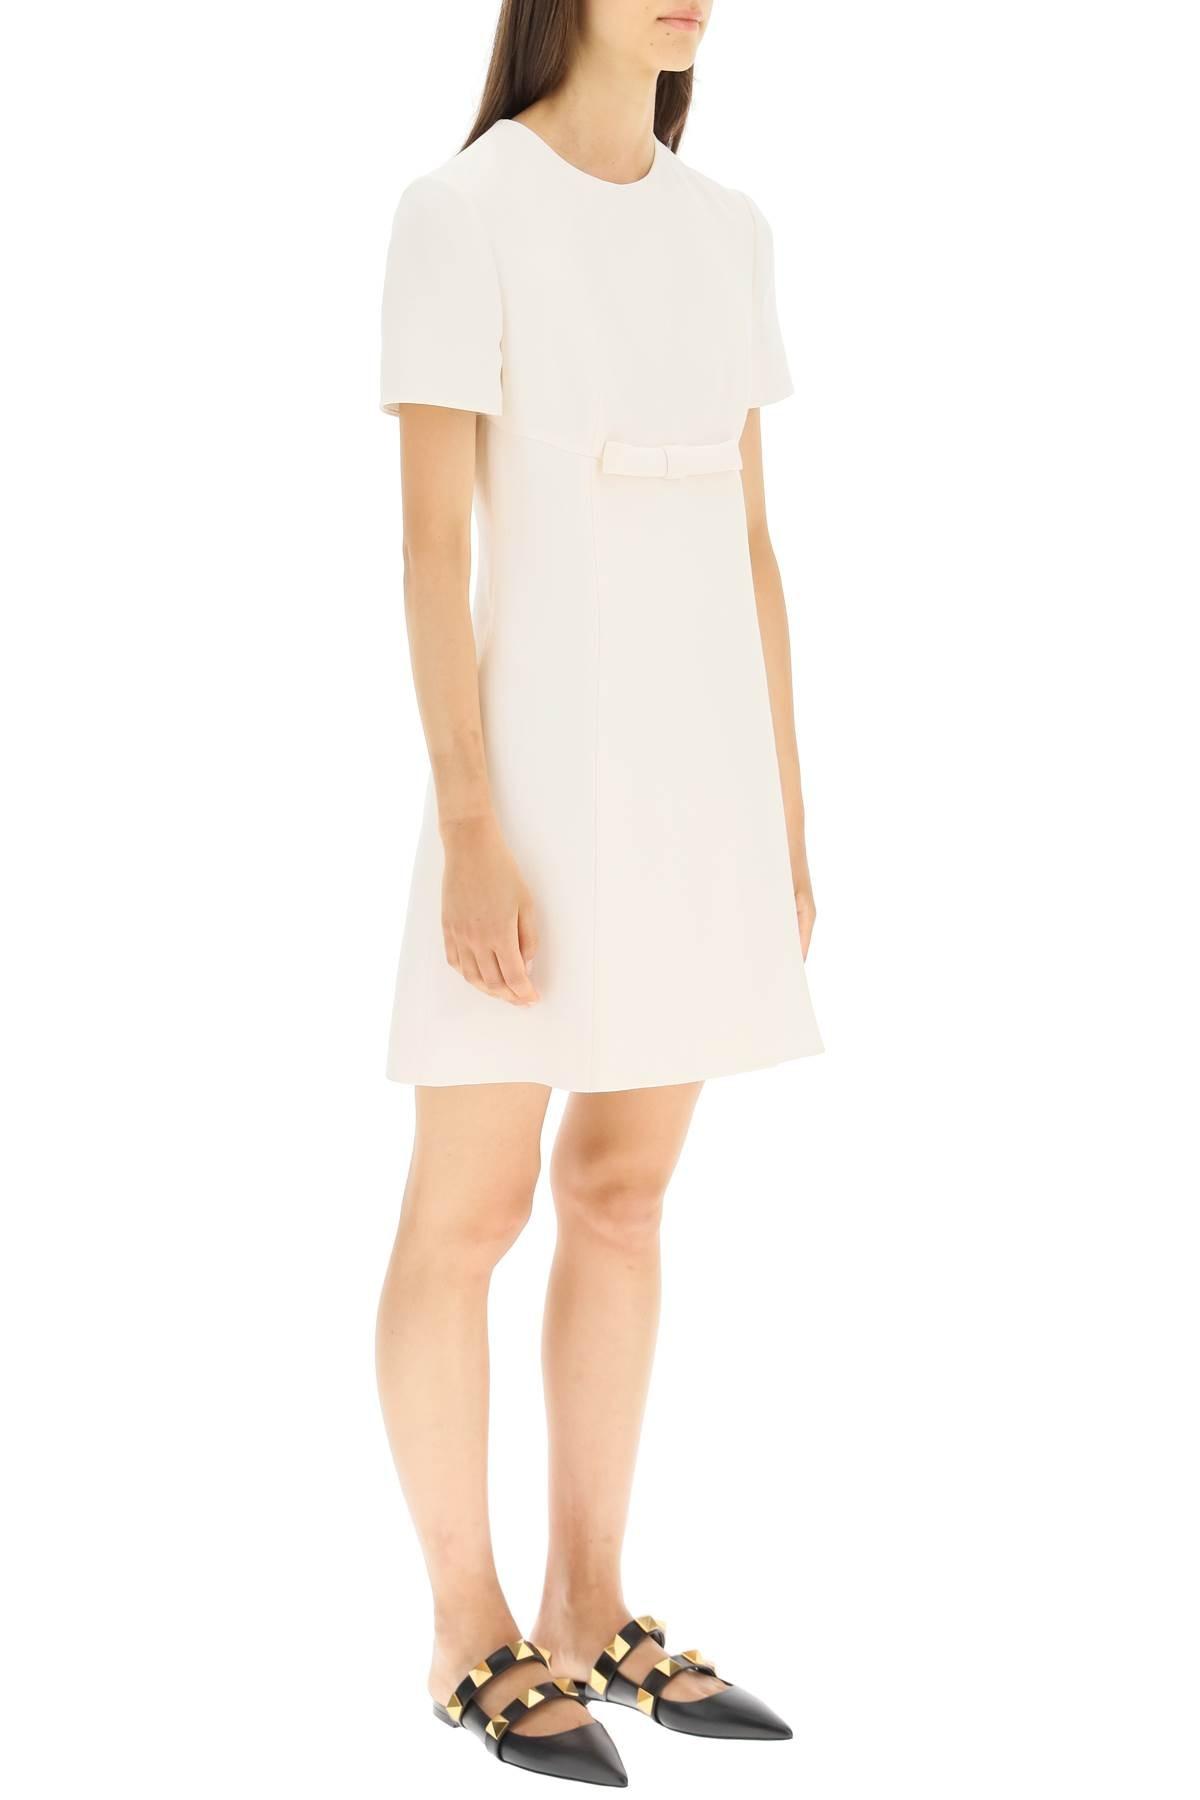 Valentino Crepe Couture Mini Dress With Bow in White | Lyst